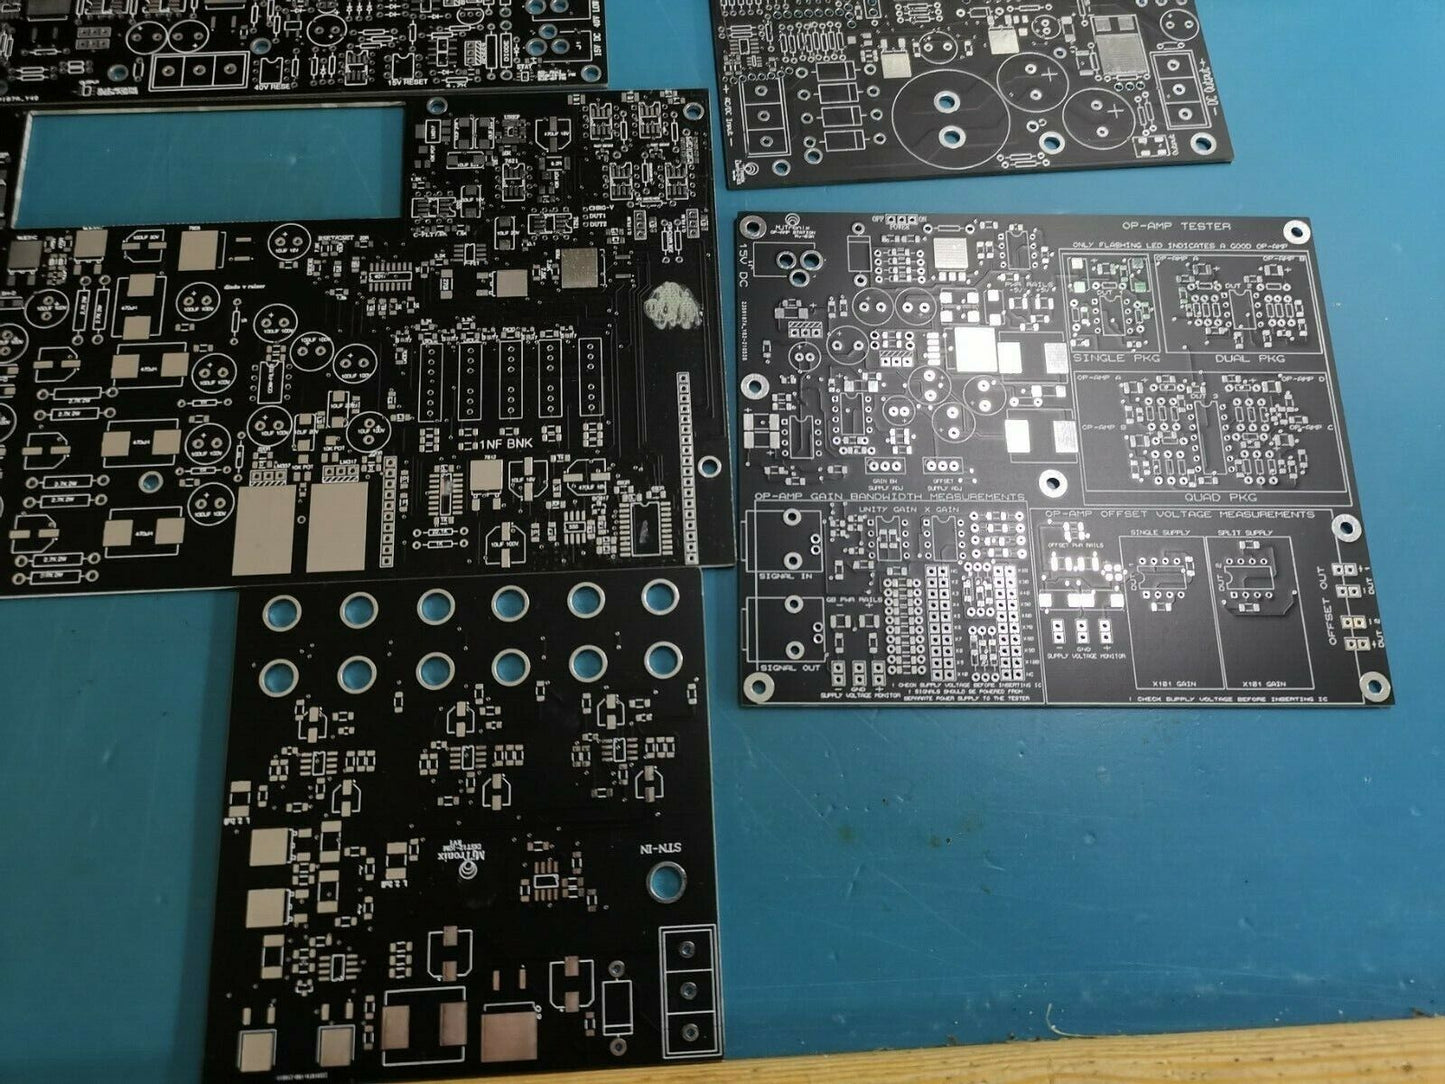 Bare PCB For Soldering Practices Job lots